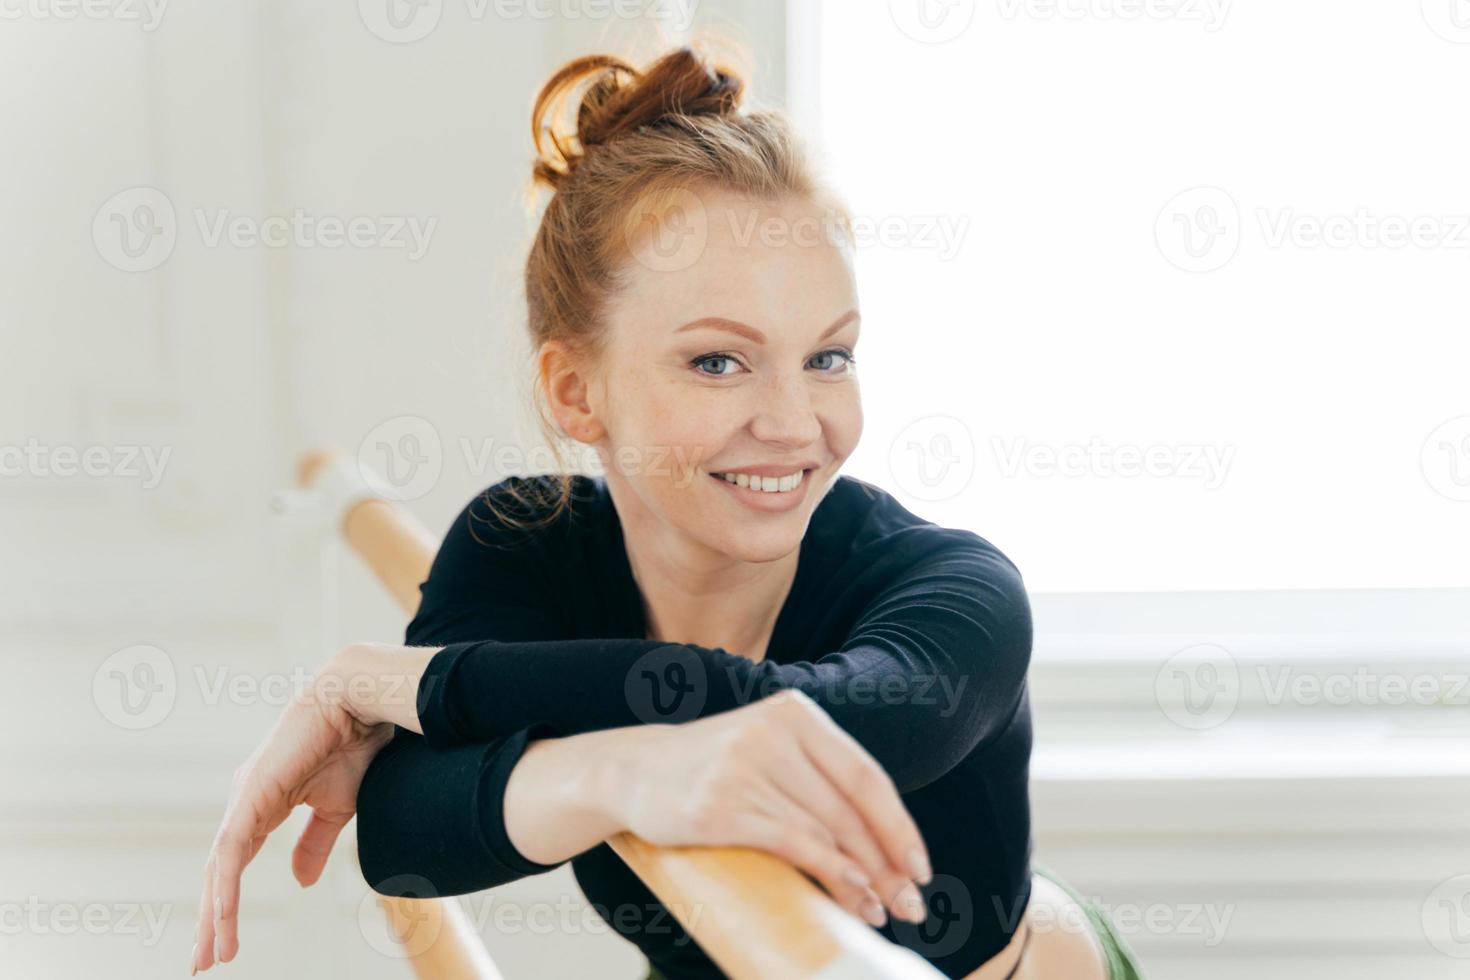 Fitness female with red combed hair, wears special clothes, practices ballet on barre in dancing studio, has toothy smile, being in high spirit, wears makeup, has healthy lifestyle. Training concept photo